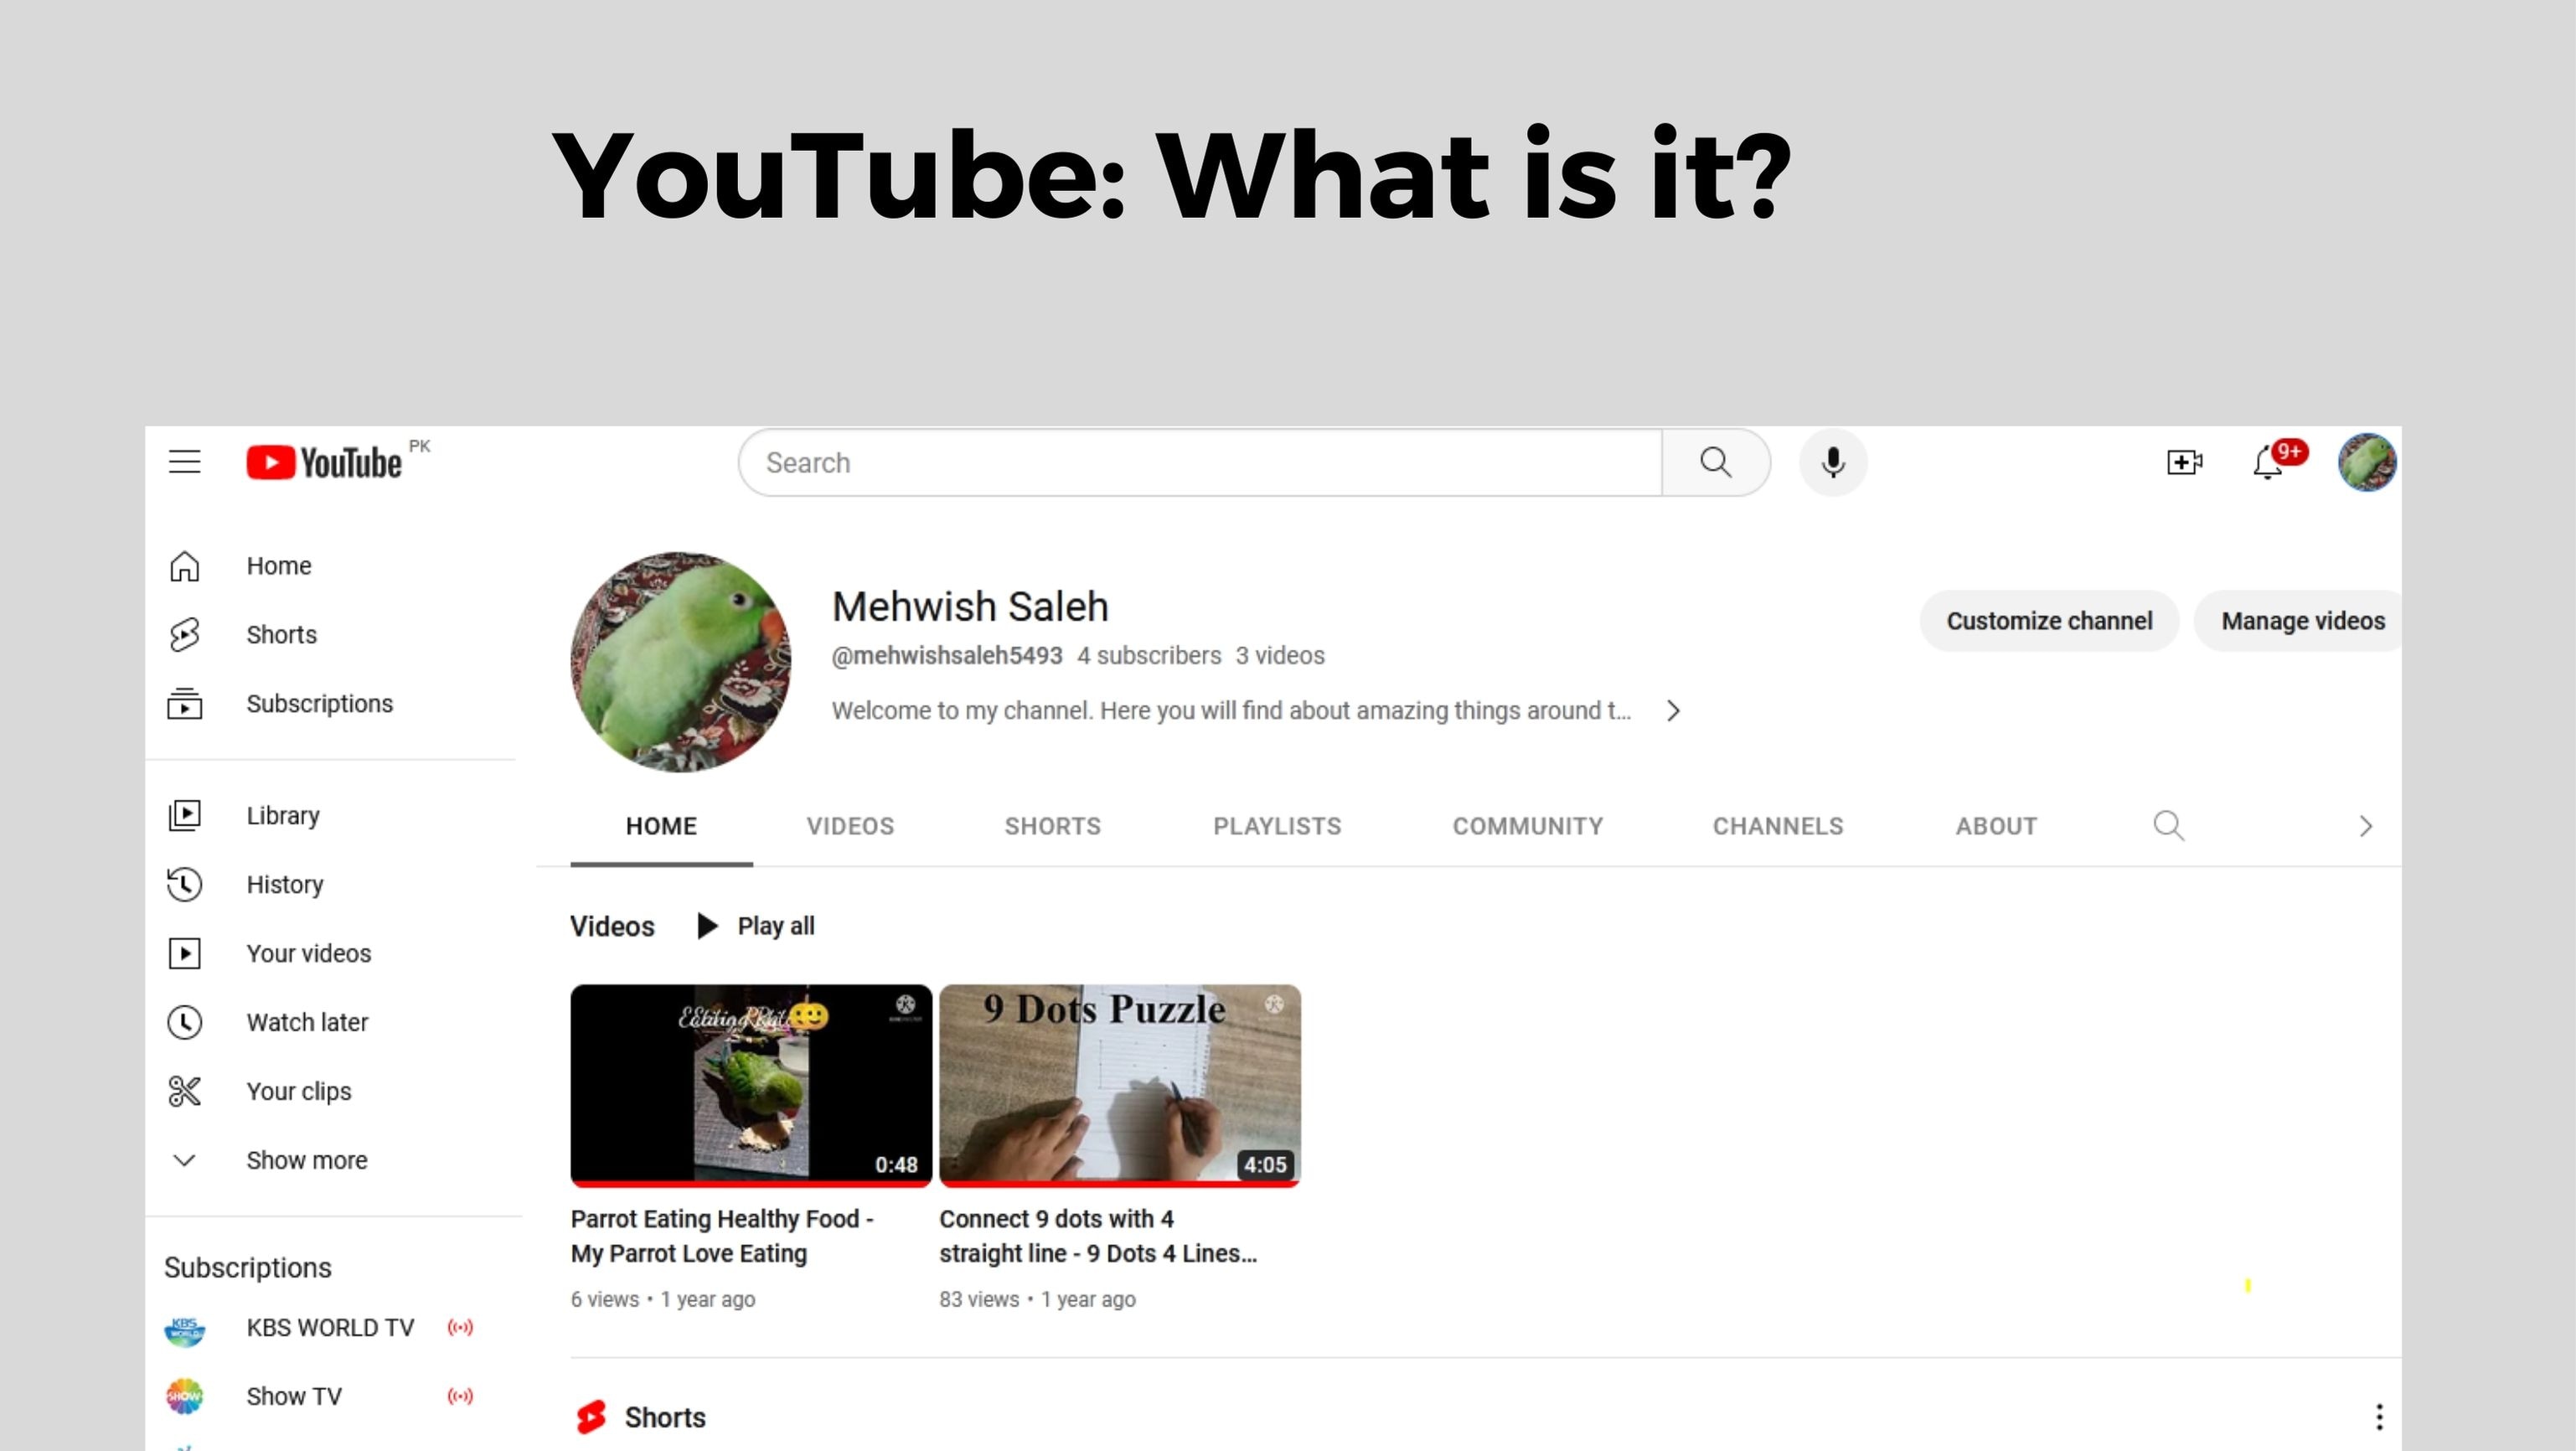 youtube: what is it